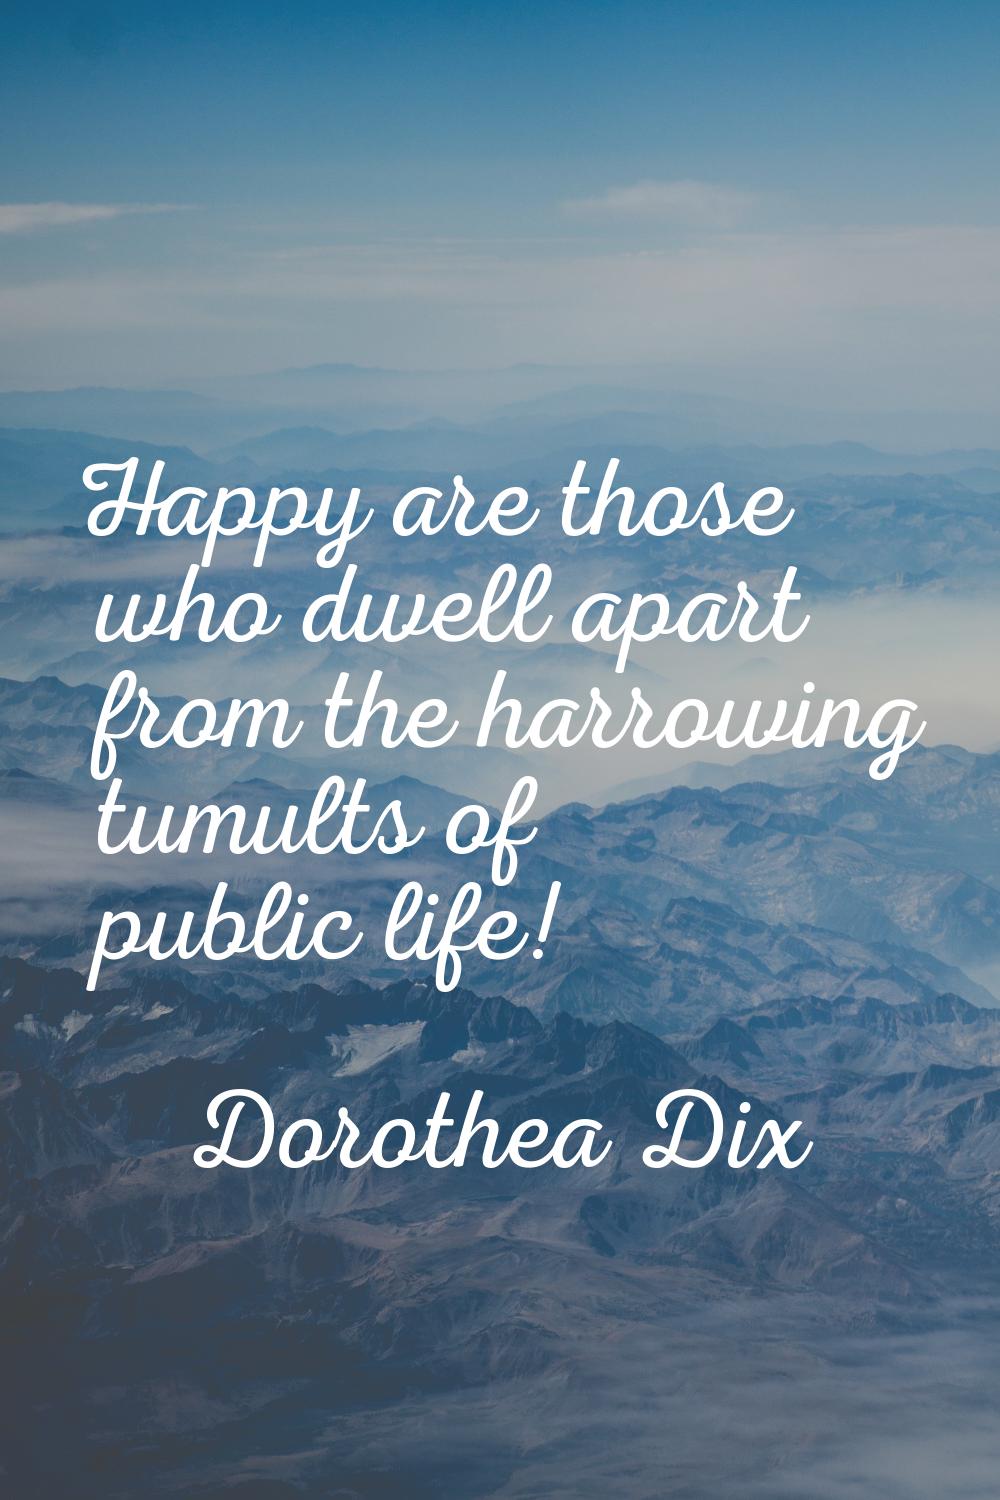 Happy are those who dwell apart from the harrowing tumults of public life!